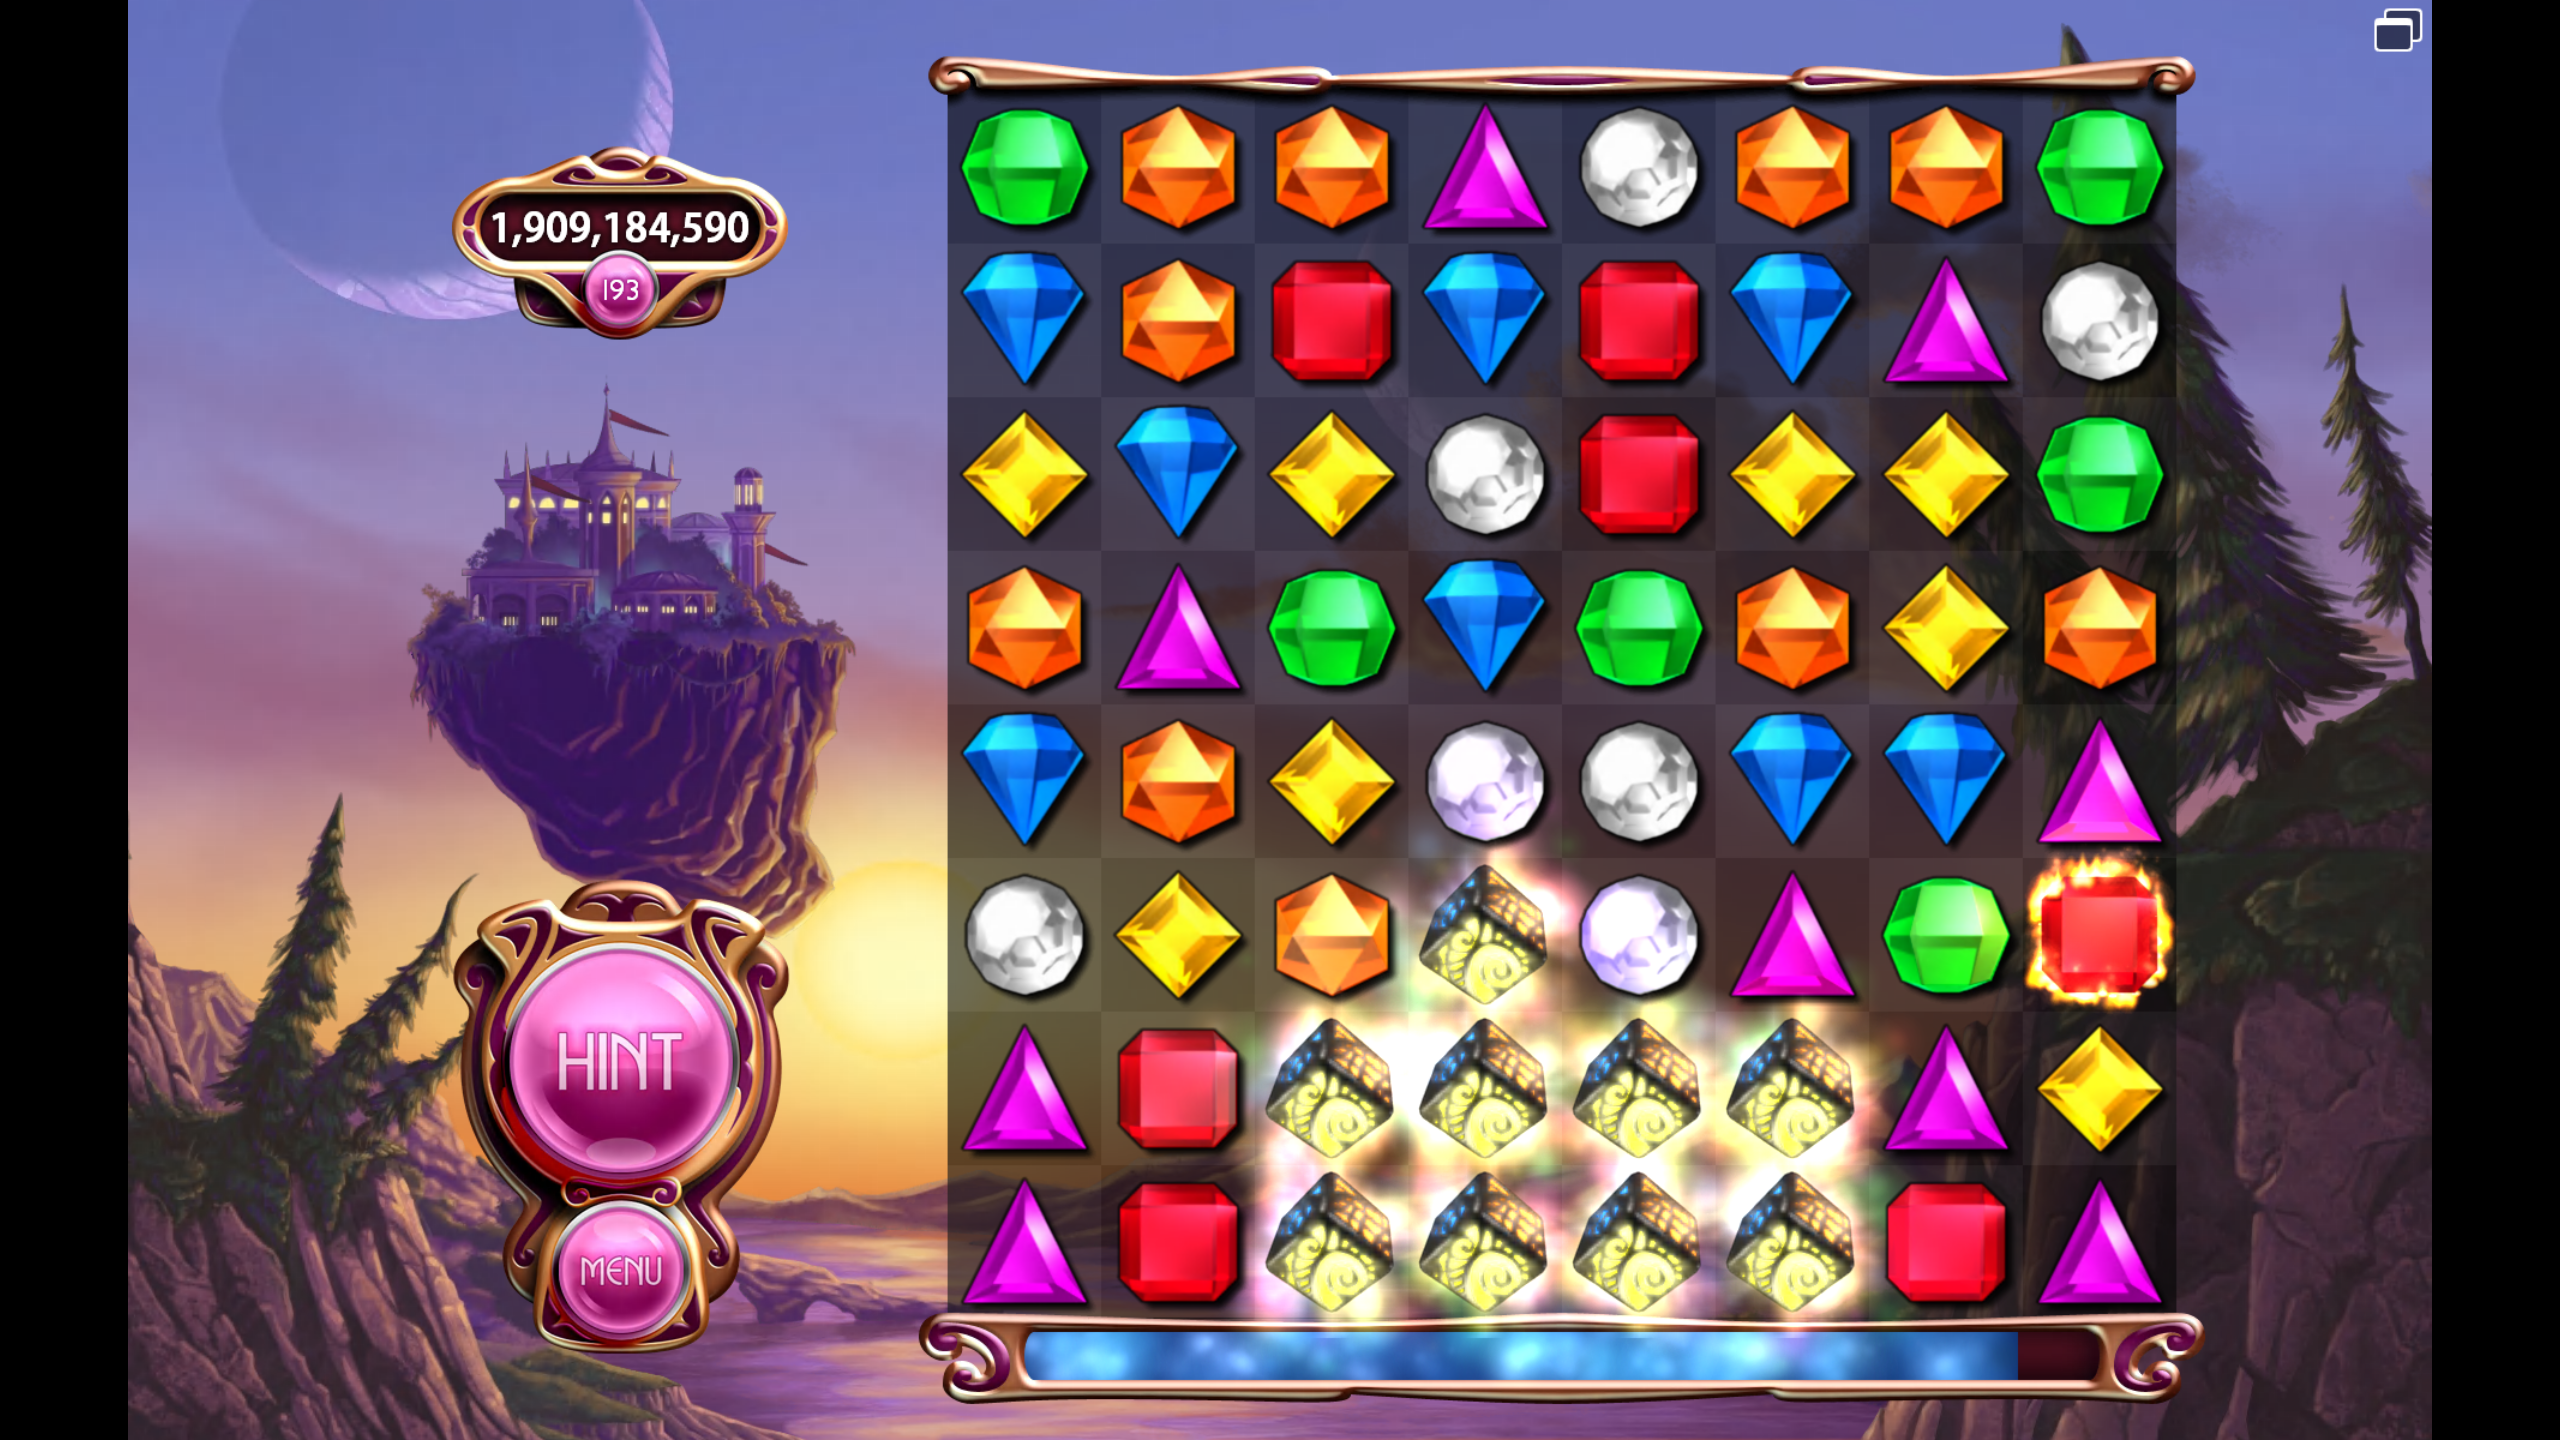 BrassRat: Bejeweled 3 [Classic] (PC) 1,909,184,590 points on 2015-06-21 13:21:58